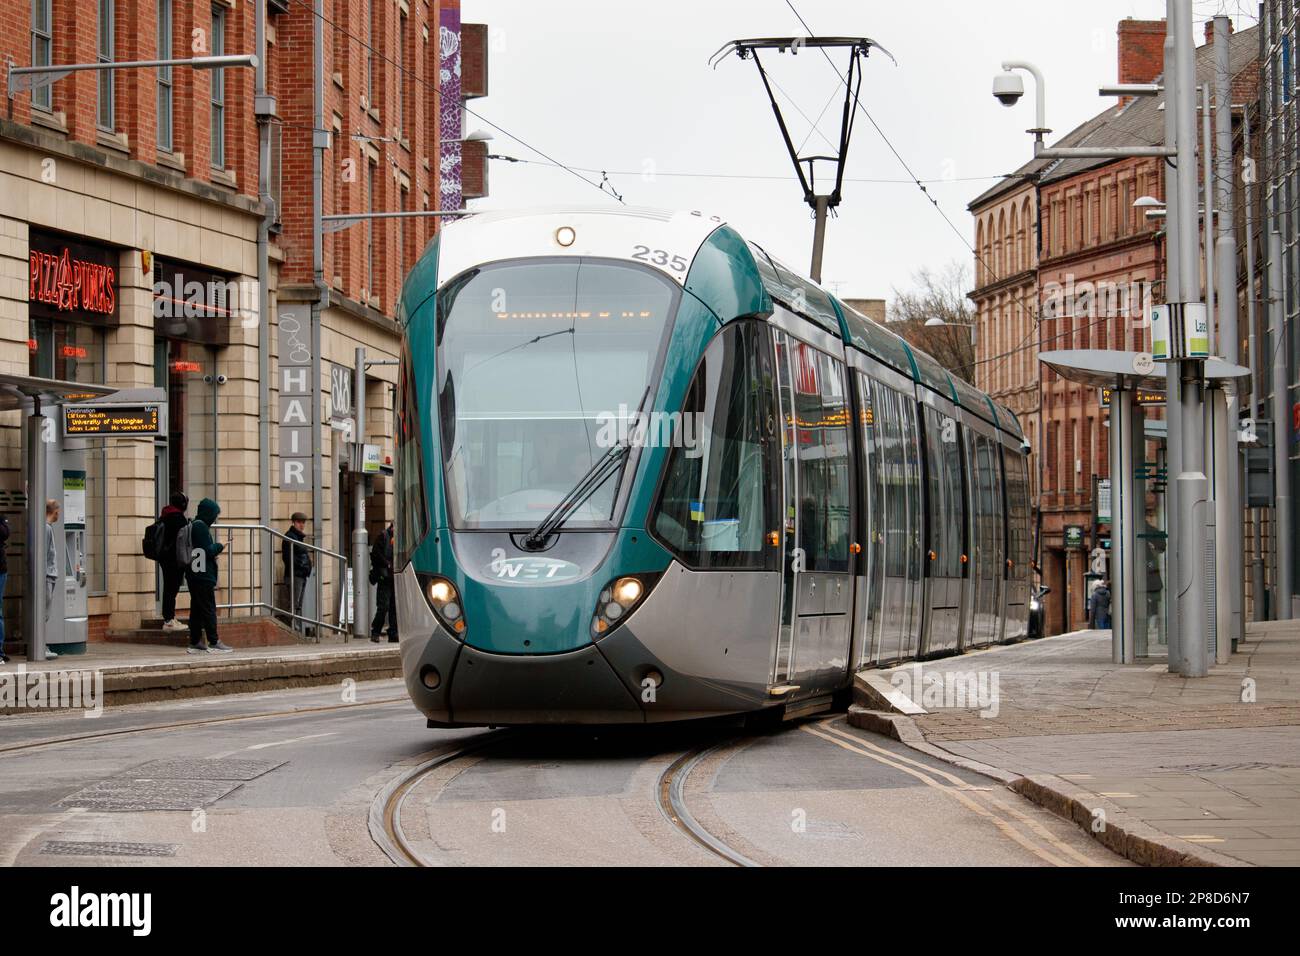 The Nottingham tram that takes the route from Clifton South to Pheonix Park. Trams in Nottingham started in 2004 and the system has been added to over recent years to incorporate Park and Ride schemes. This route goes from the outskirts of the city (near the exit from the M1 motorway) into the centre. Pictured the tram making it's way up Victoria Street in the City Centre. Stock Photo